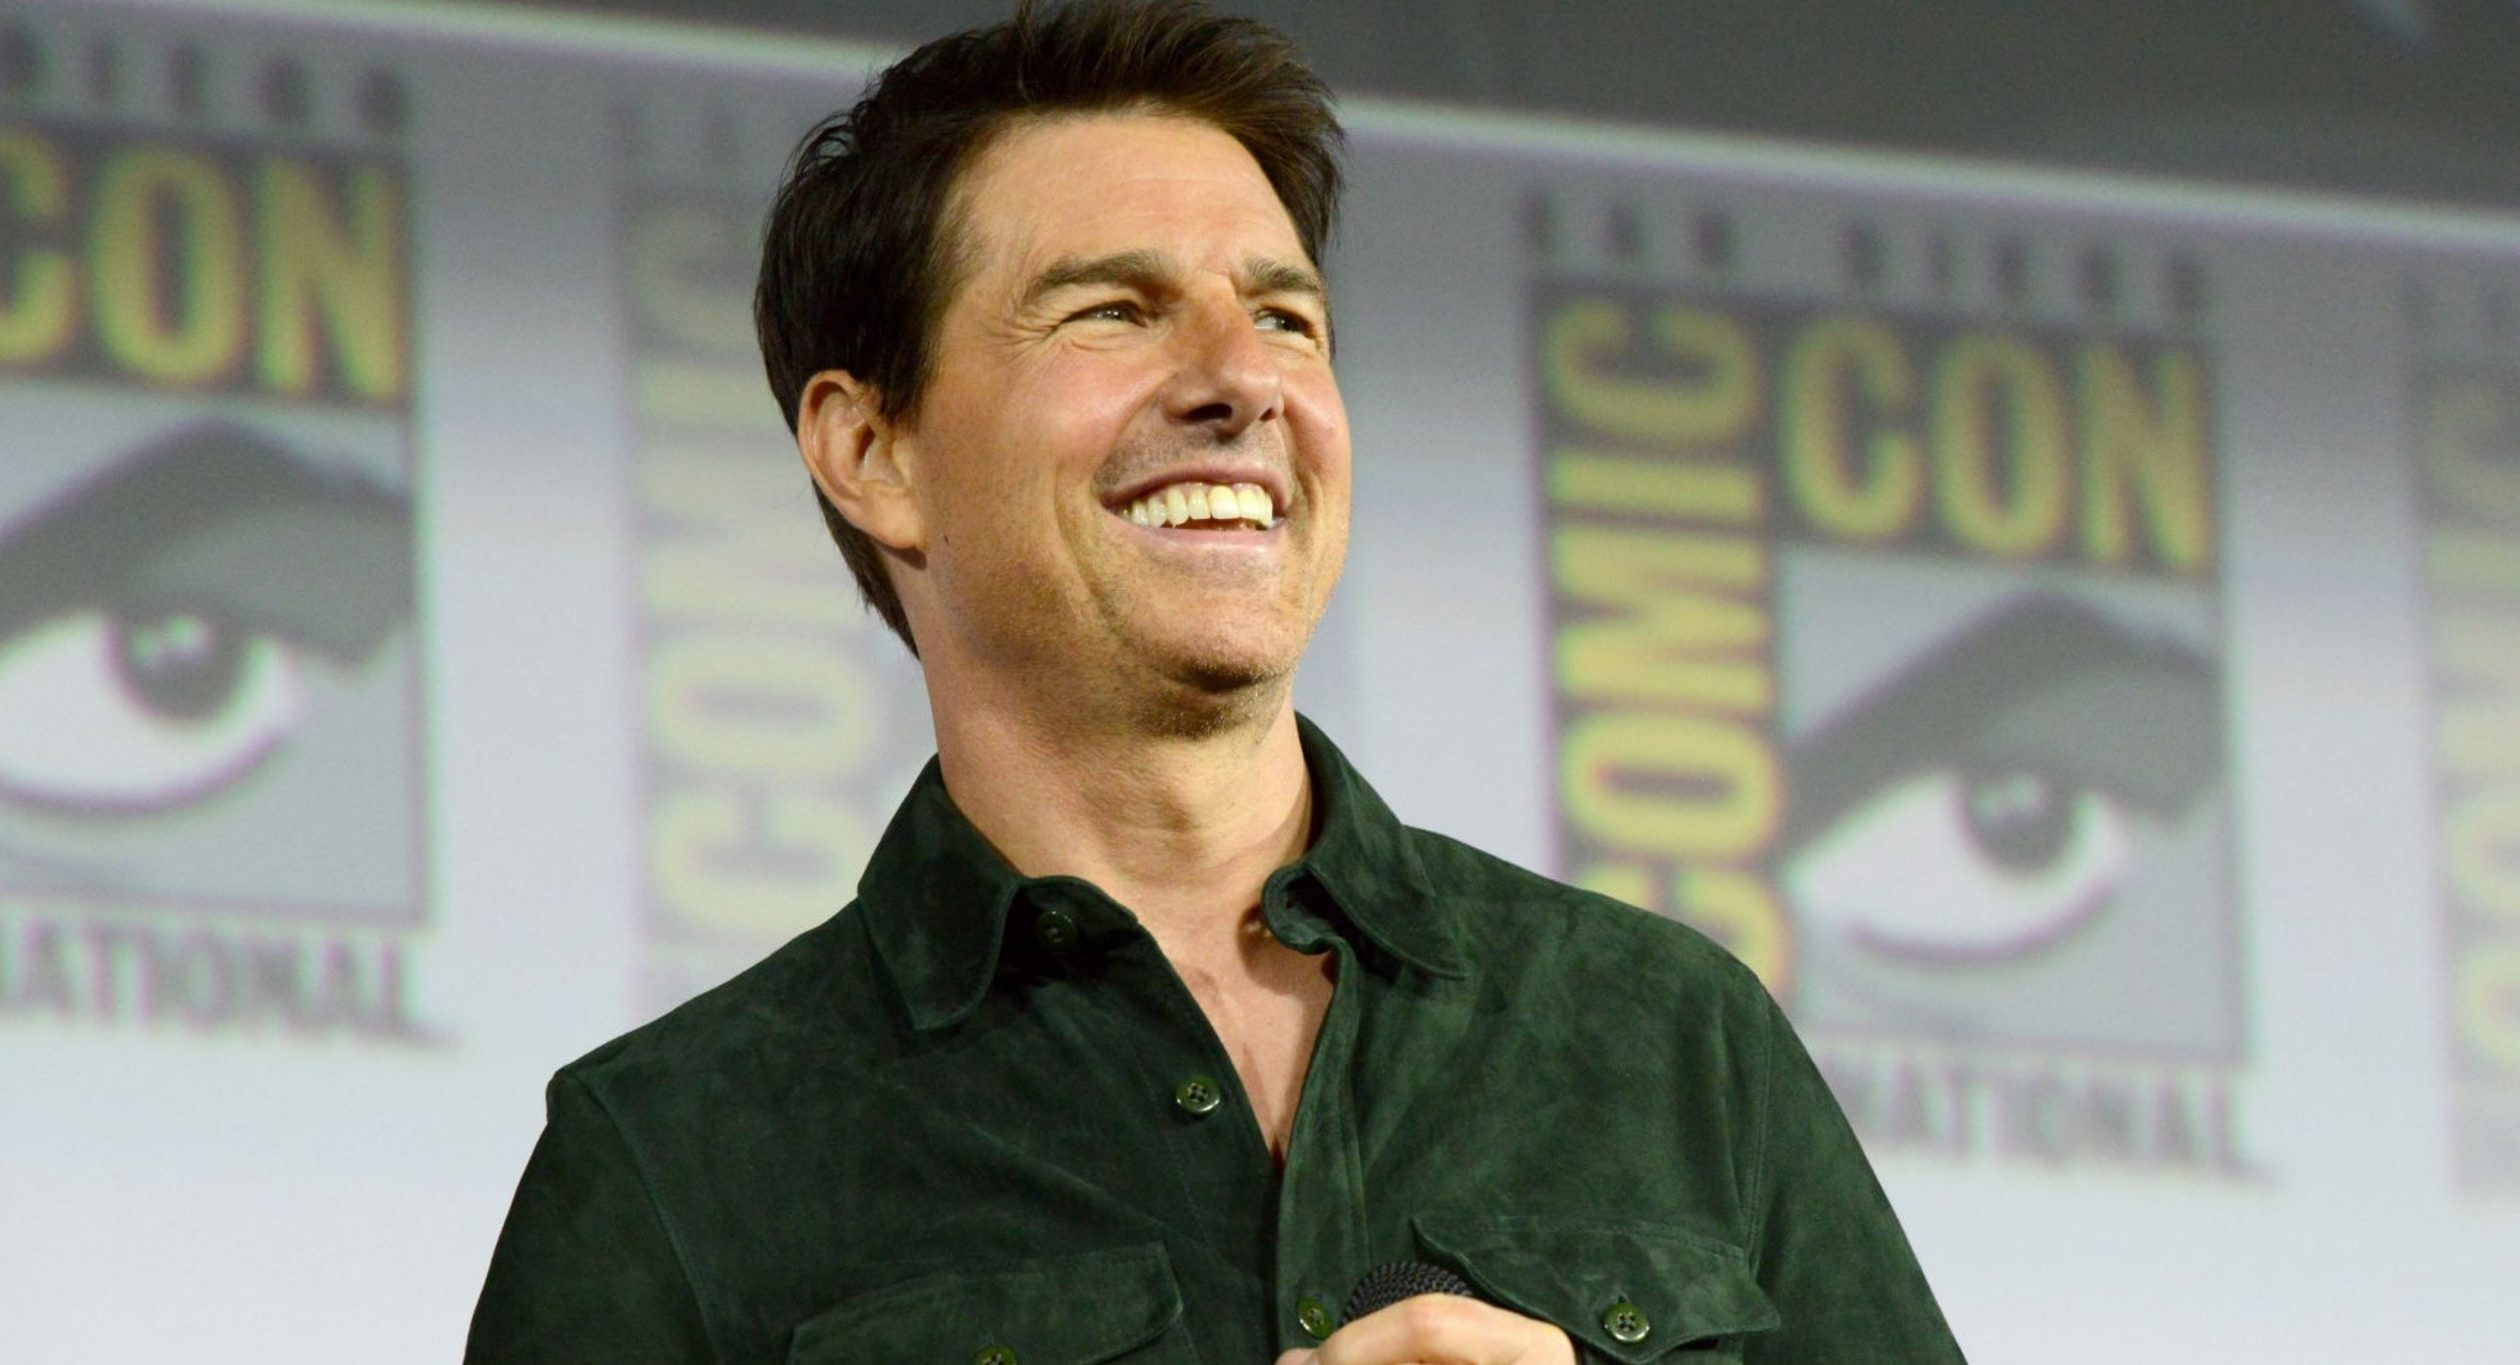 Tom Cruise makes surprise appearance at Comic-Con International to present Top Gun Trailer